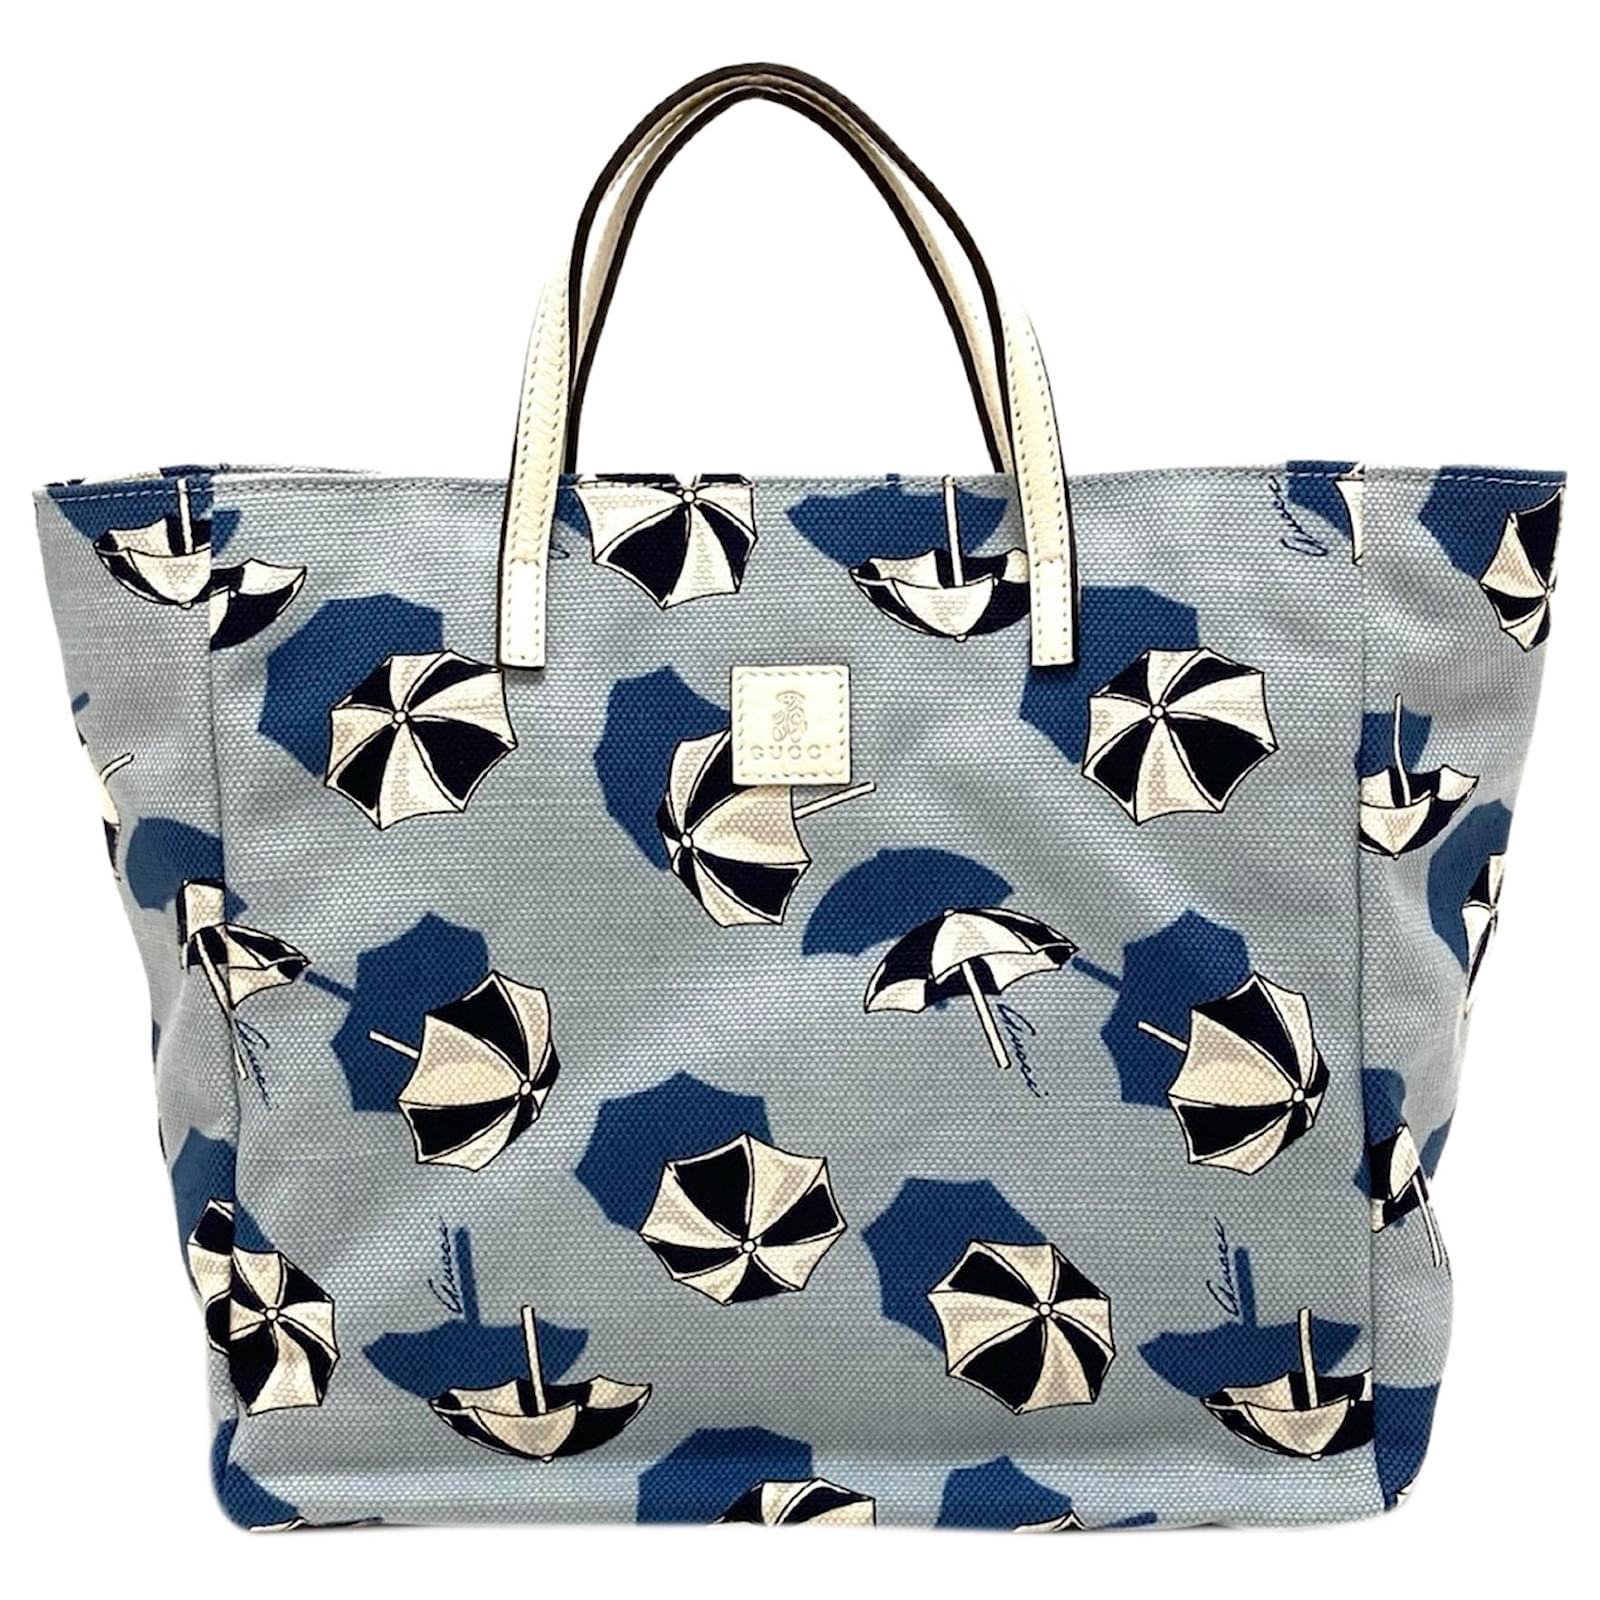 Mini leather-trimmed printed canvas tote